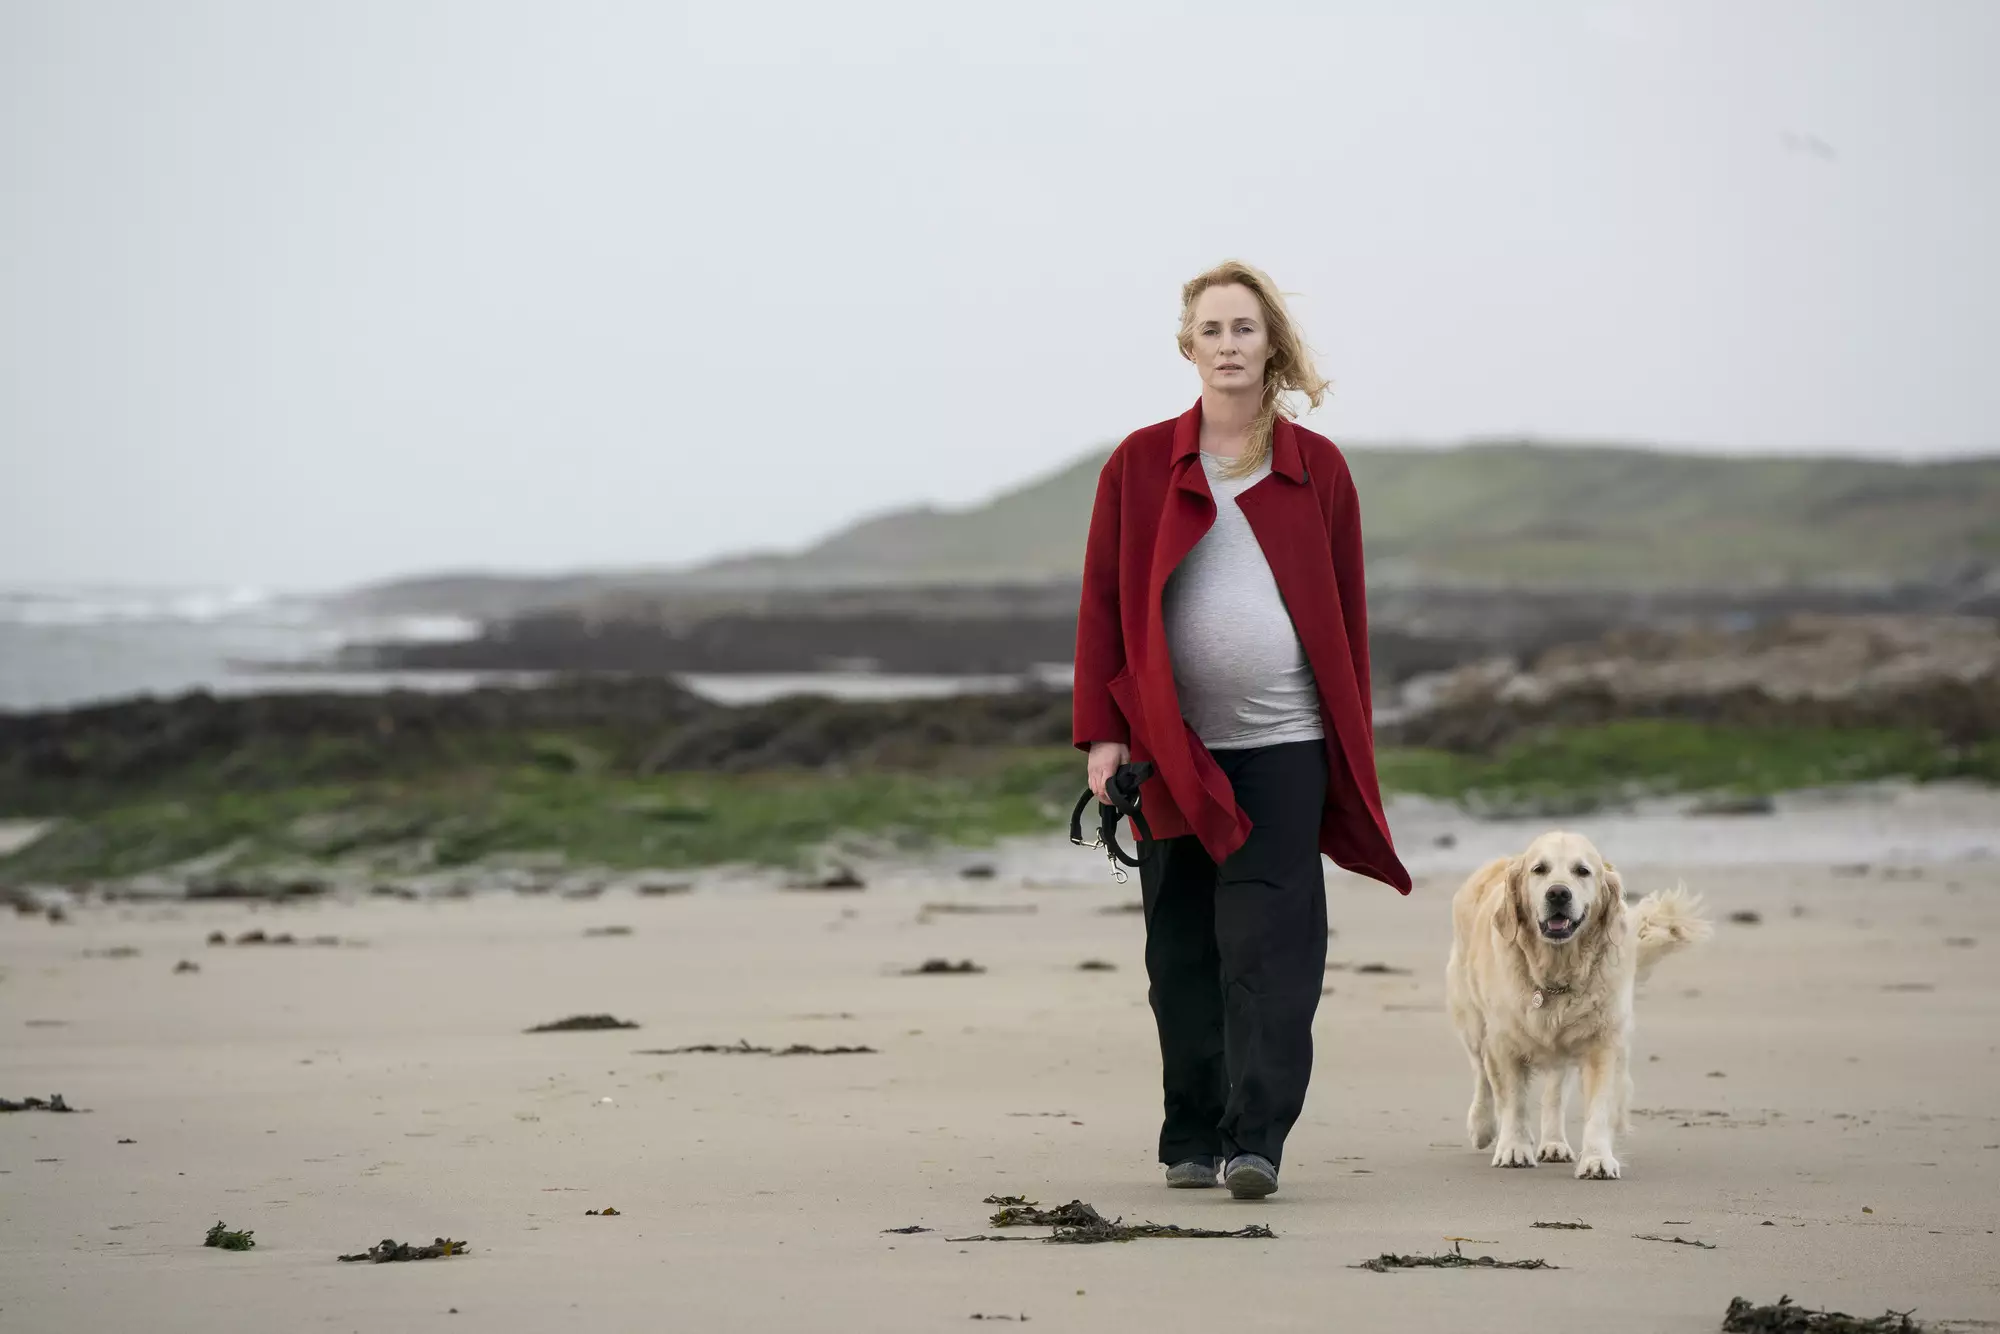 Rosie is an older woman whose unborn child has a genetic condition (